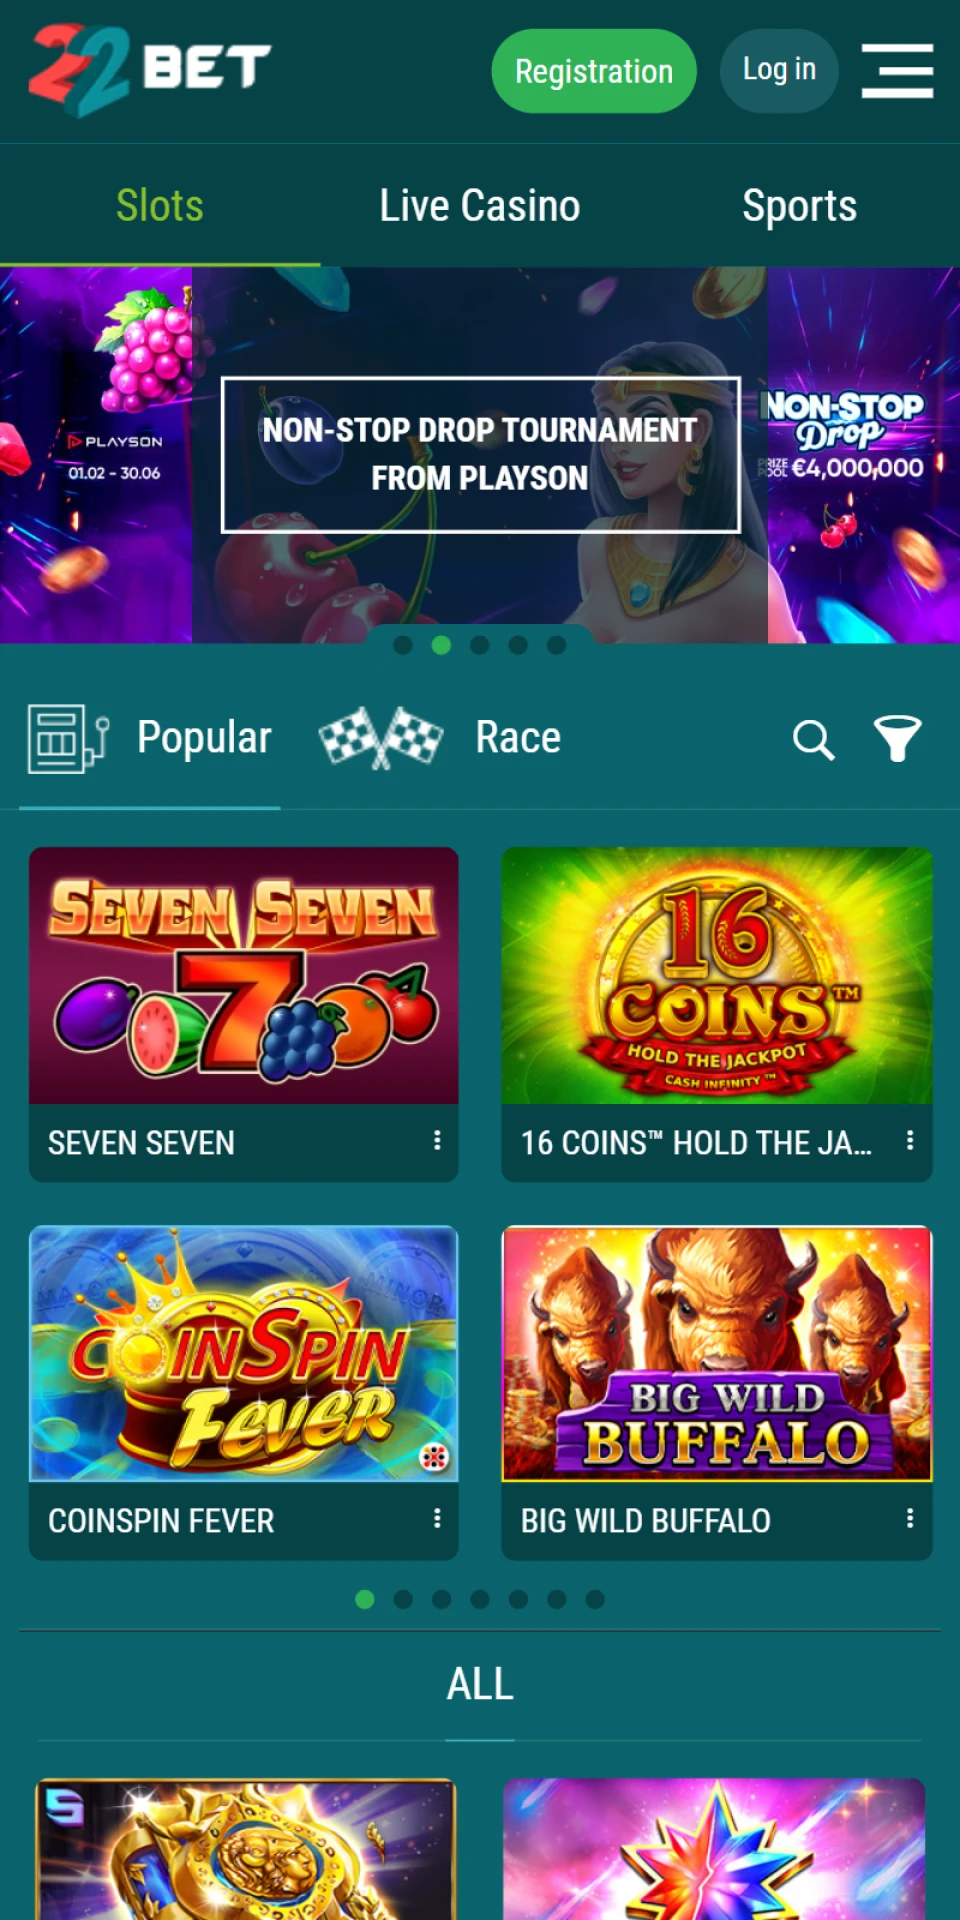 Choose your favorite casino game and start playing on the 22bet mobile app.